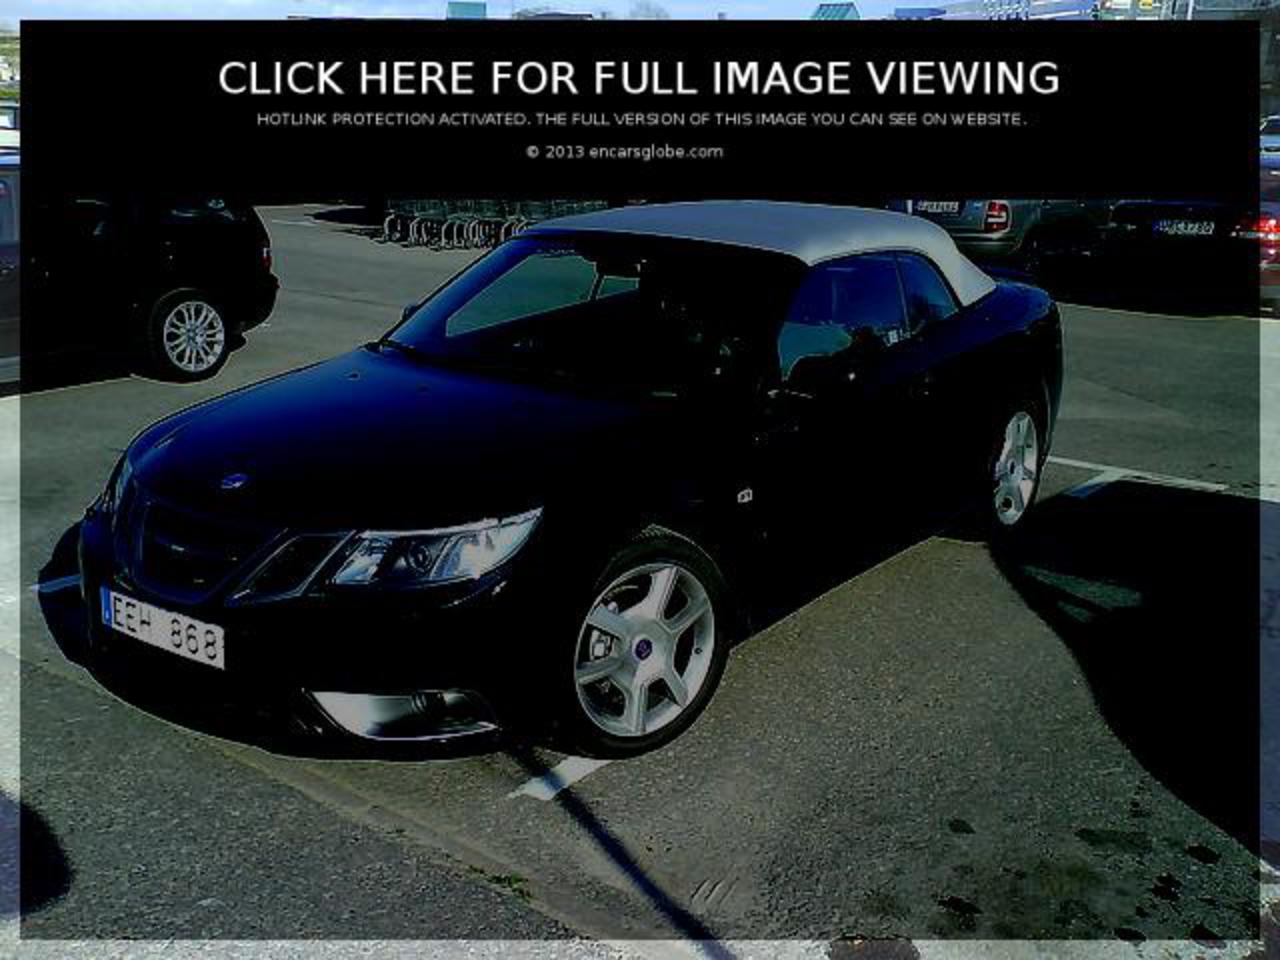 Saab 9-3 18 BioPower Convertible: Photo gallery, complete ...